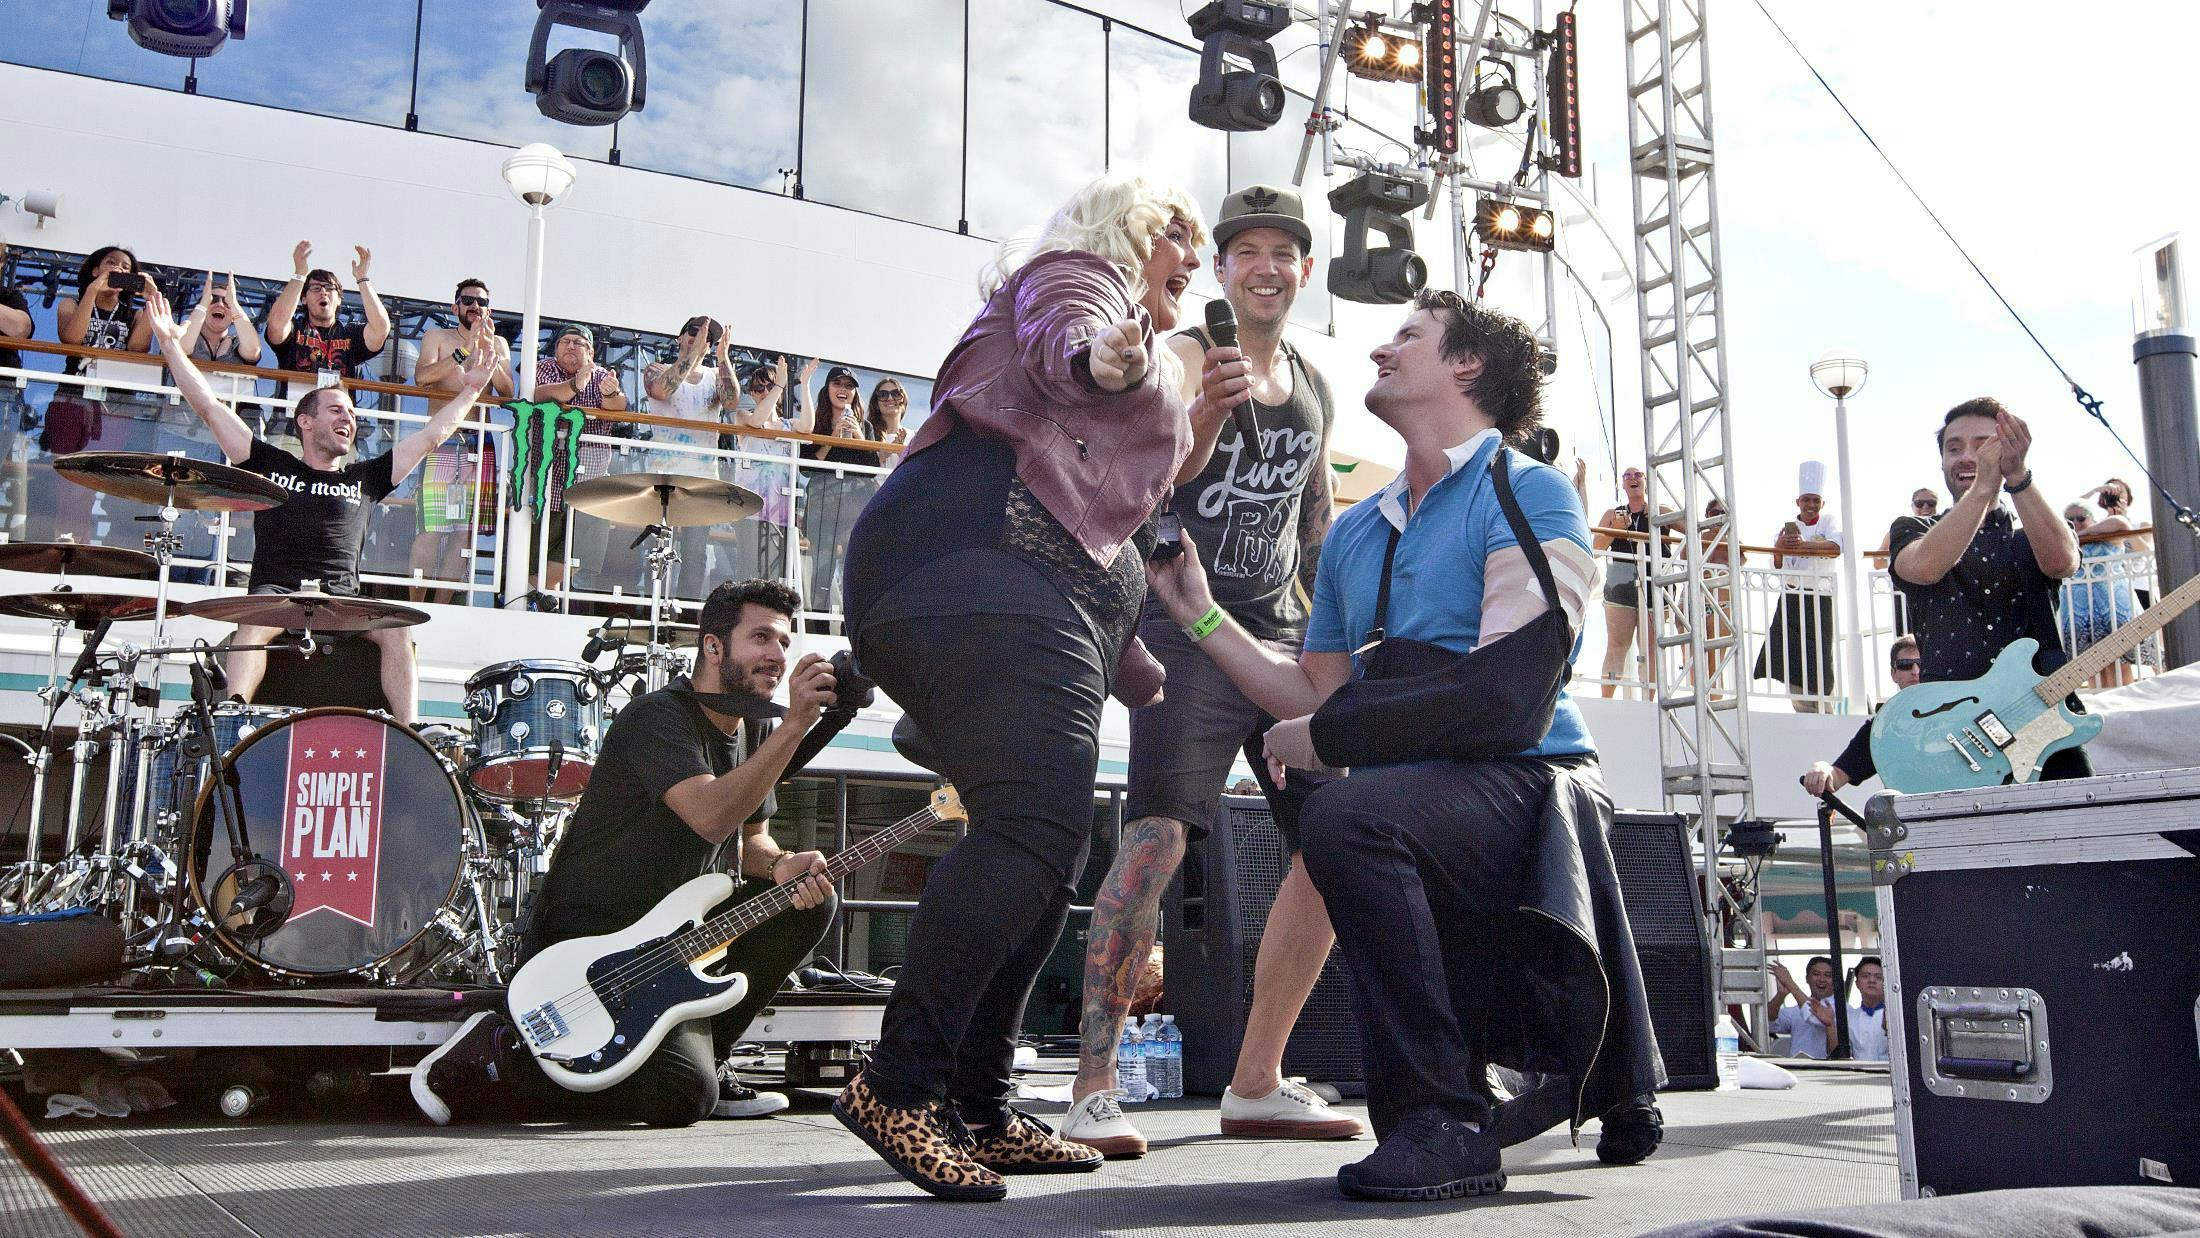 Love is in the air! A couple gets engaged during Simple Plans' set aboard the Warped Rewind At Sea Cruise 2017.